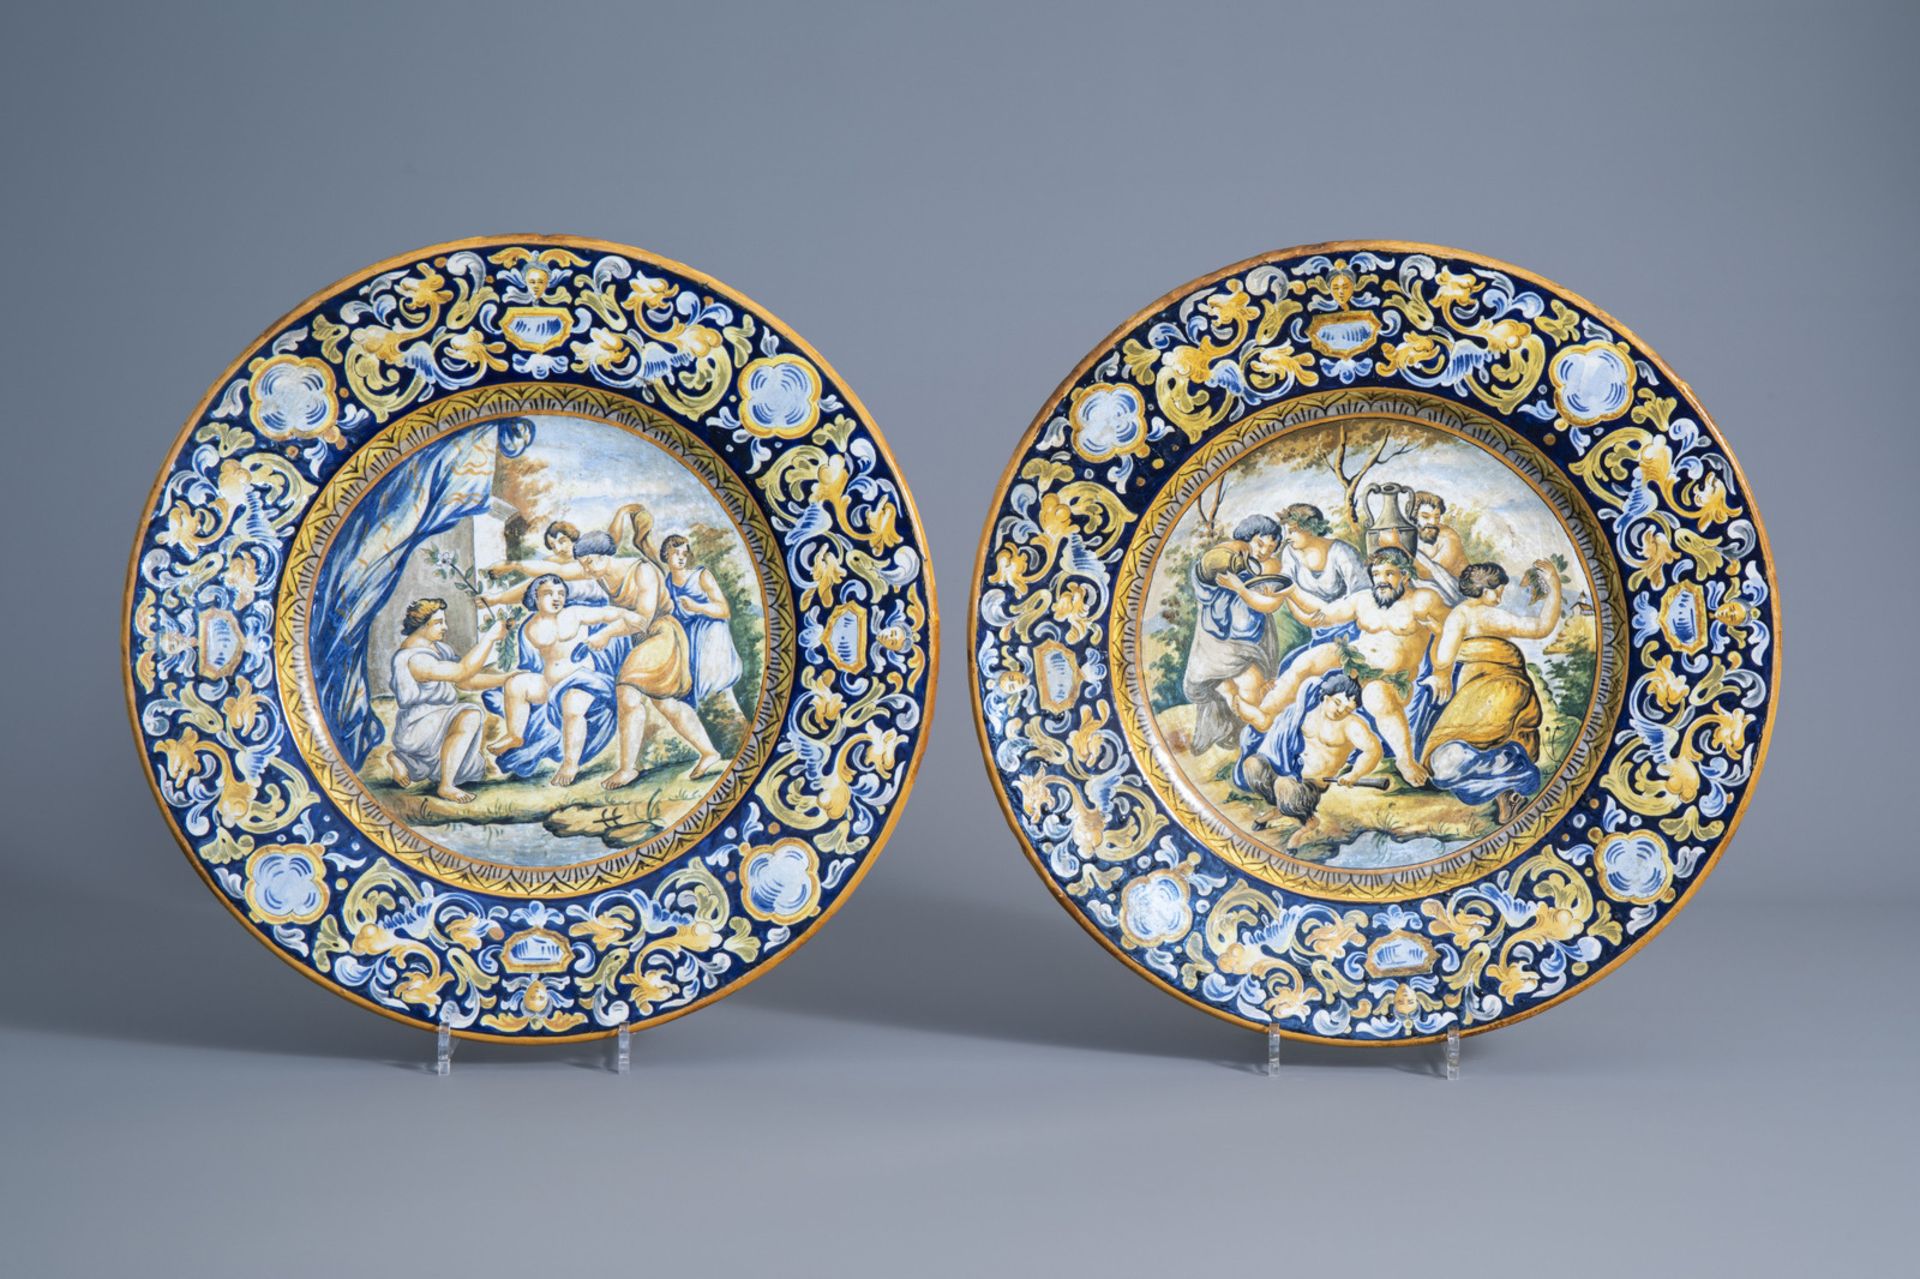 Two Italian polychrome maiolica chargers with Bacchus scenes, about 1900